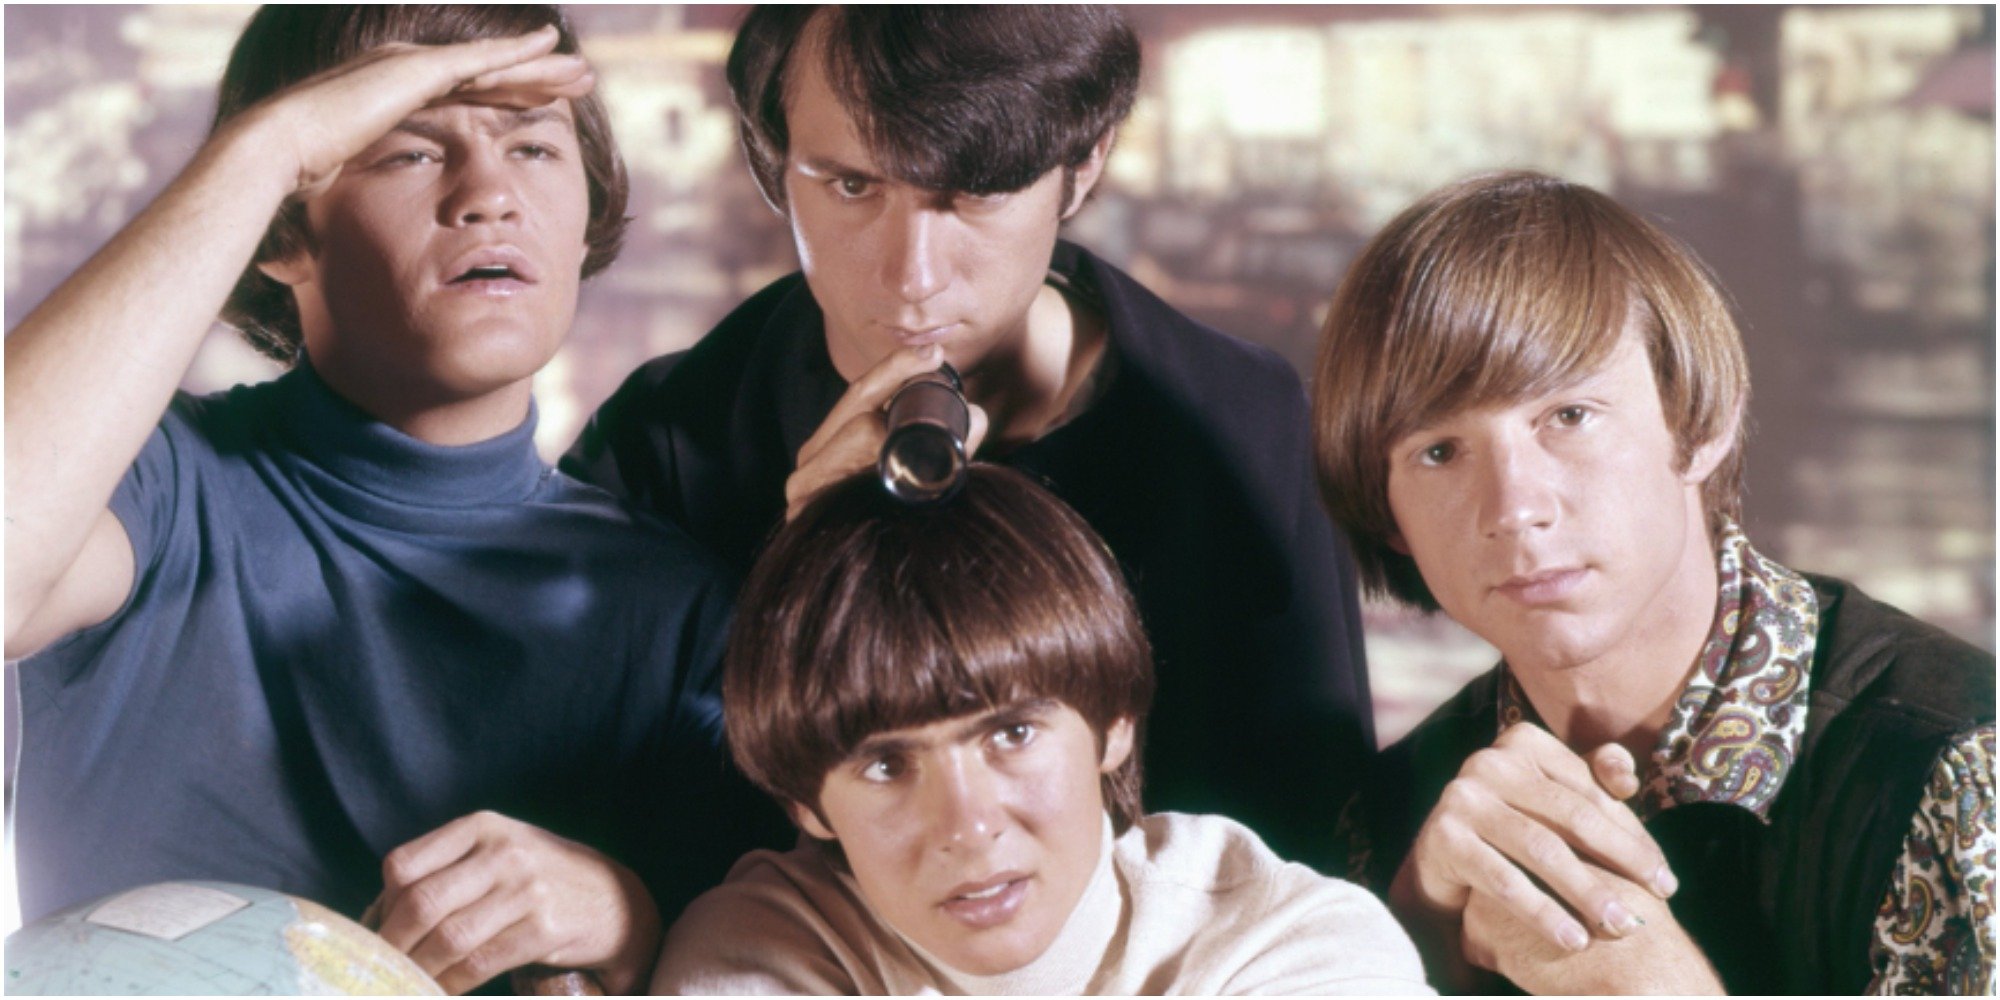 Micky Dolenz, Mike Nesmith, Peter Tork and Davy Jones.